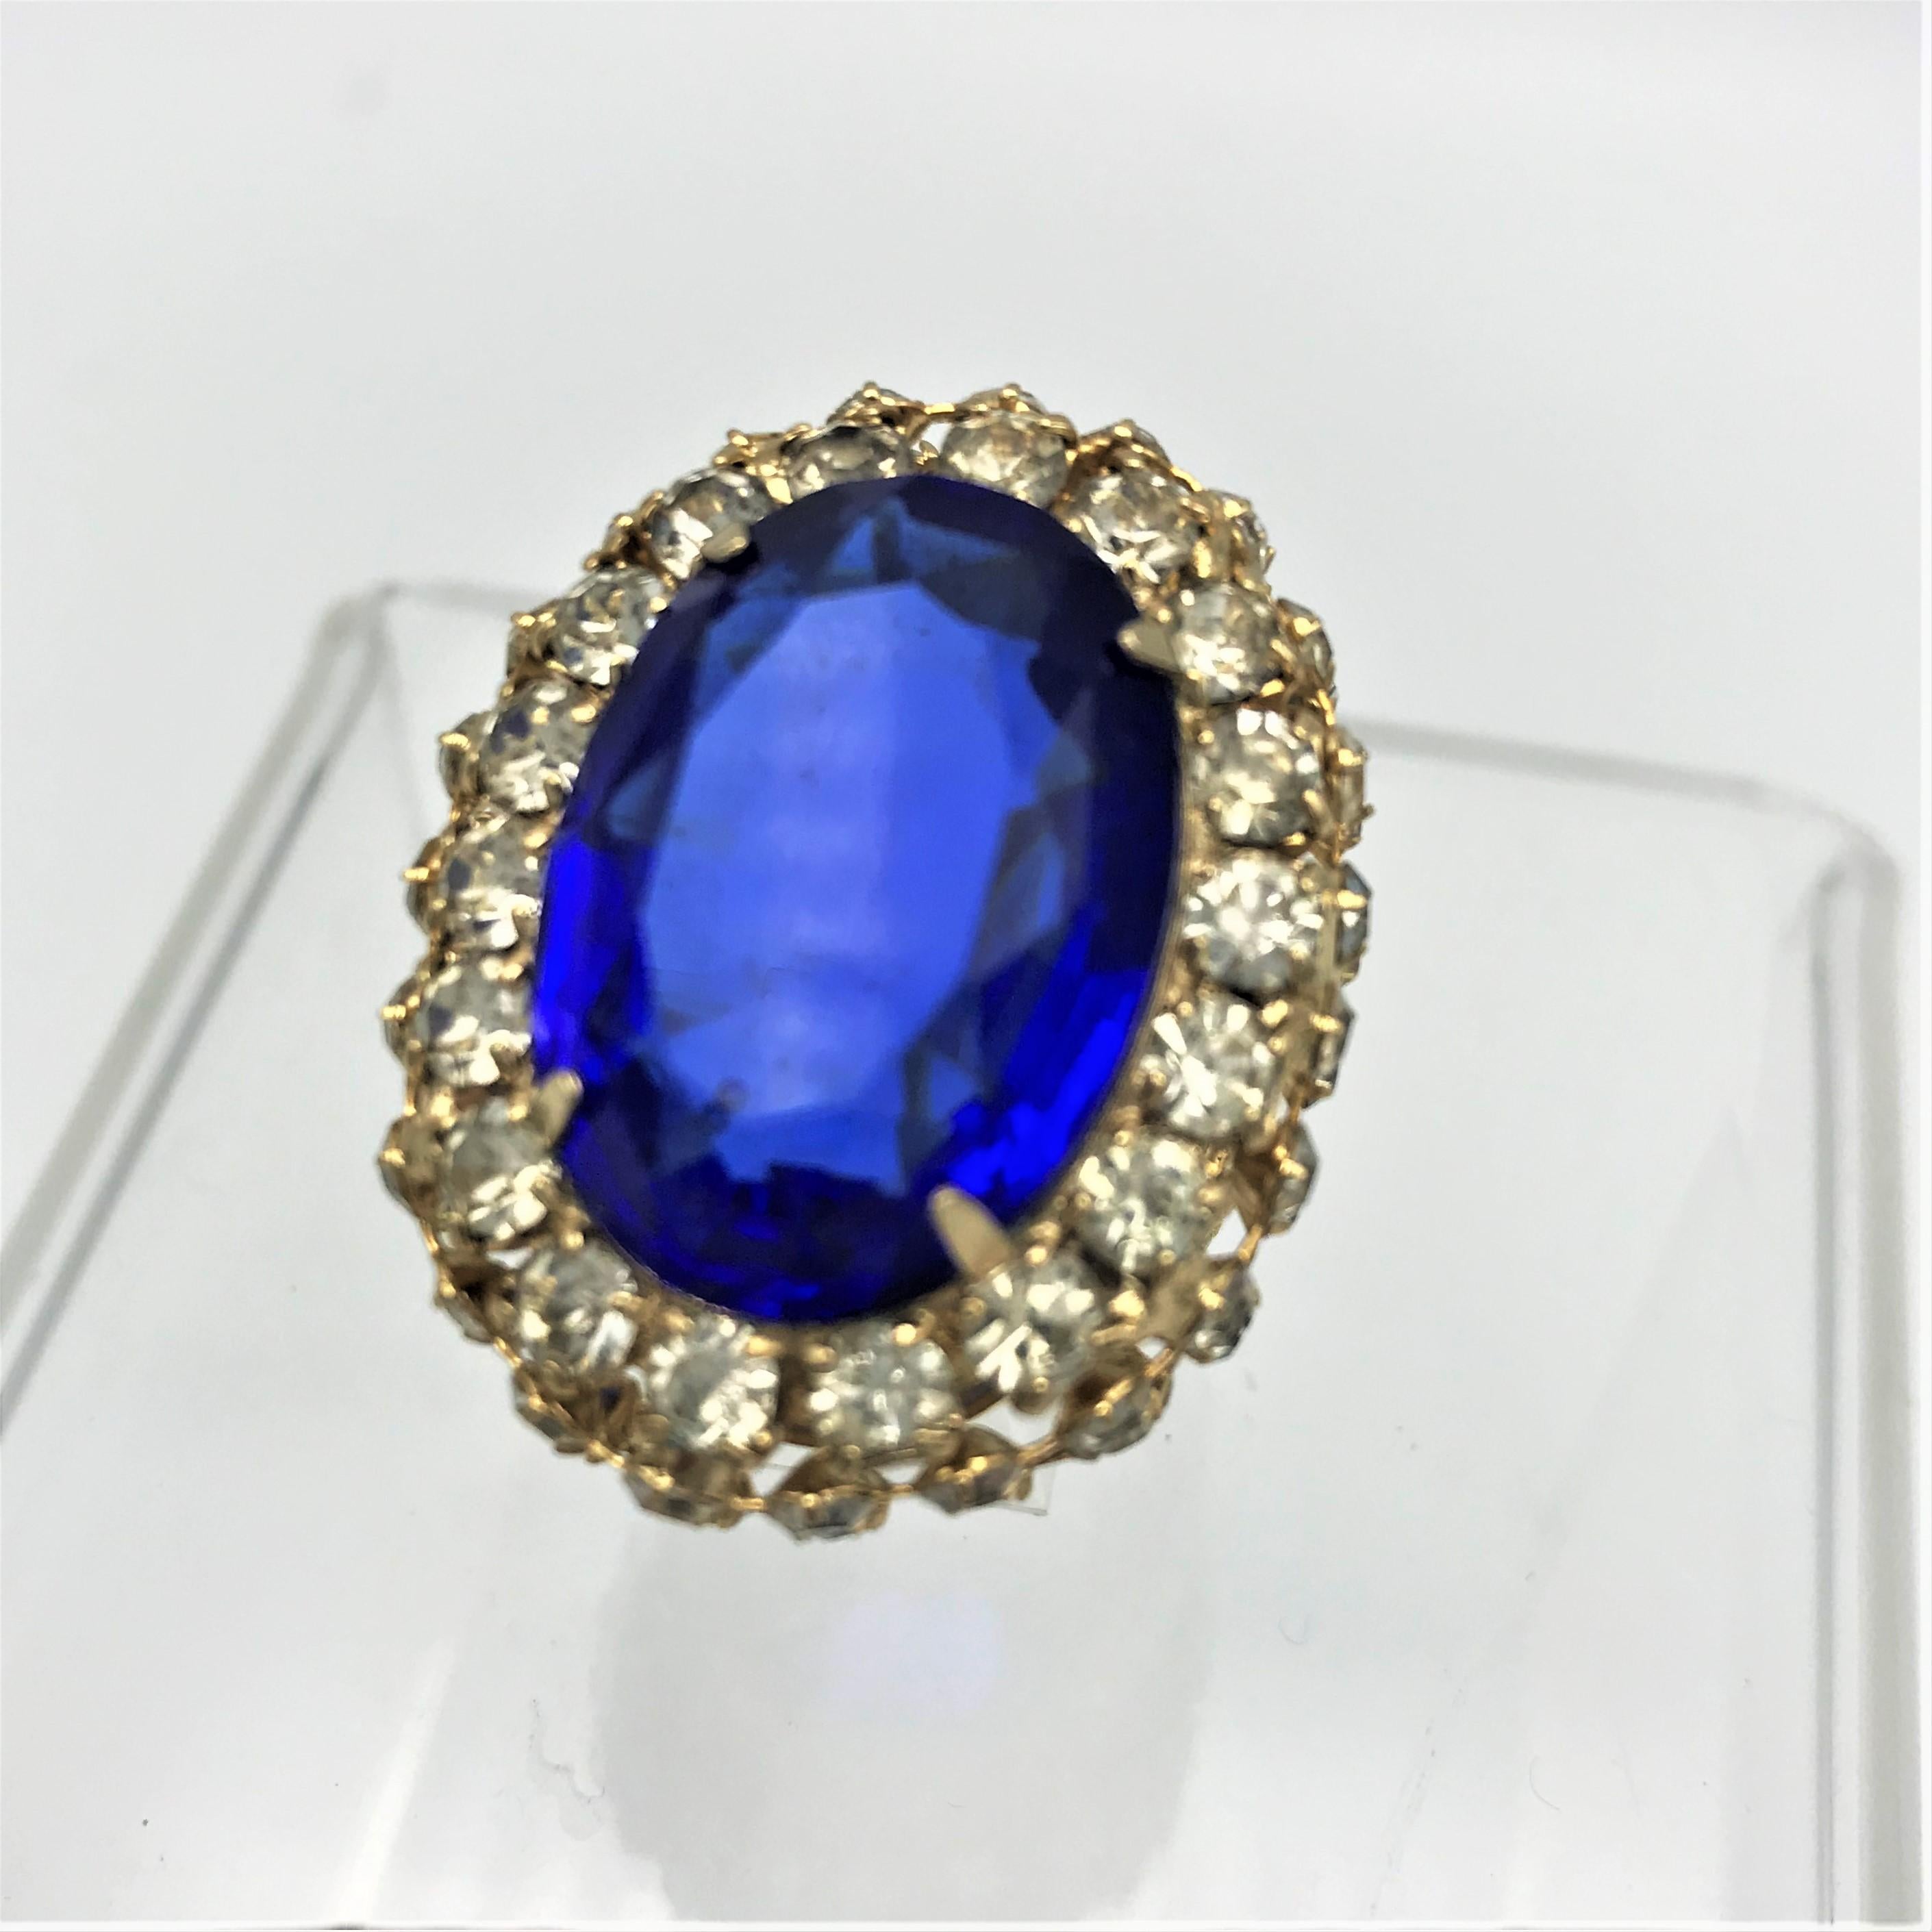 A gigantic cocktail ring with a large blue rhinestone. This is surrounded by 3 rows of clear rhinestones which are all set individually.
This ring is a piece of Hollywood history and glamor from the Harrice Miller Celebrity Collections!
Measurement: